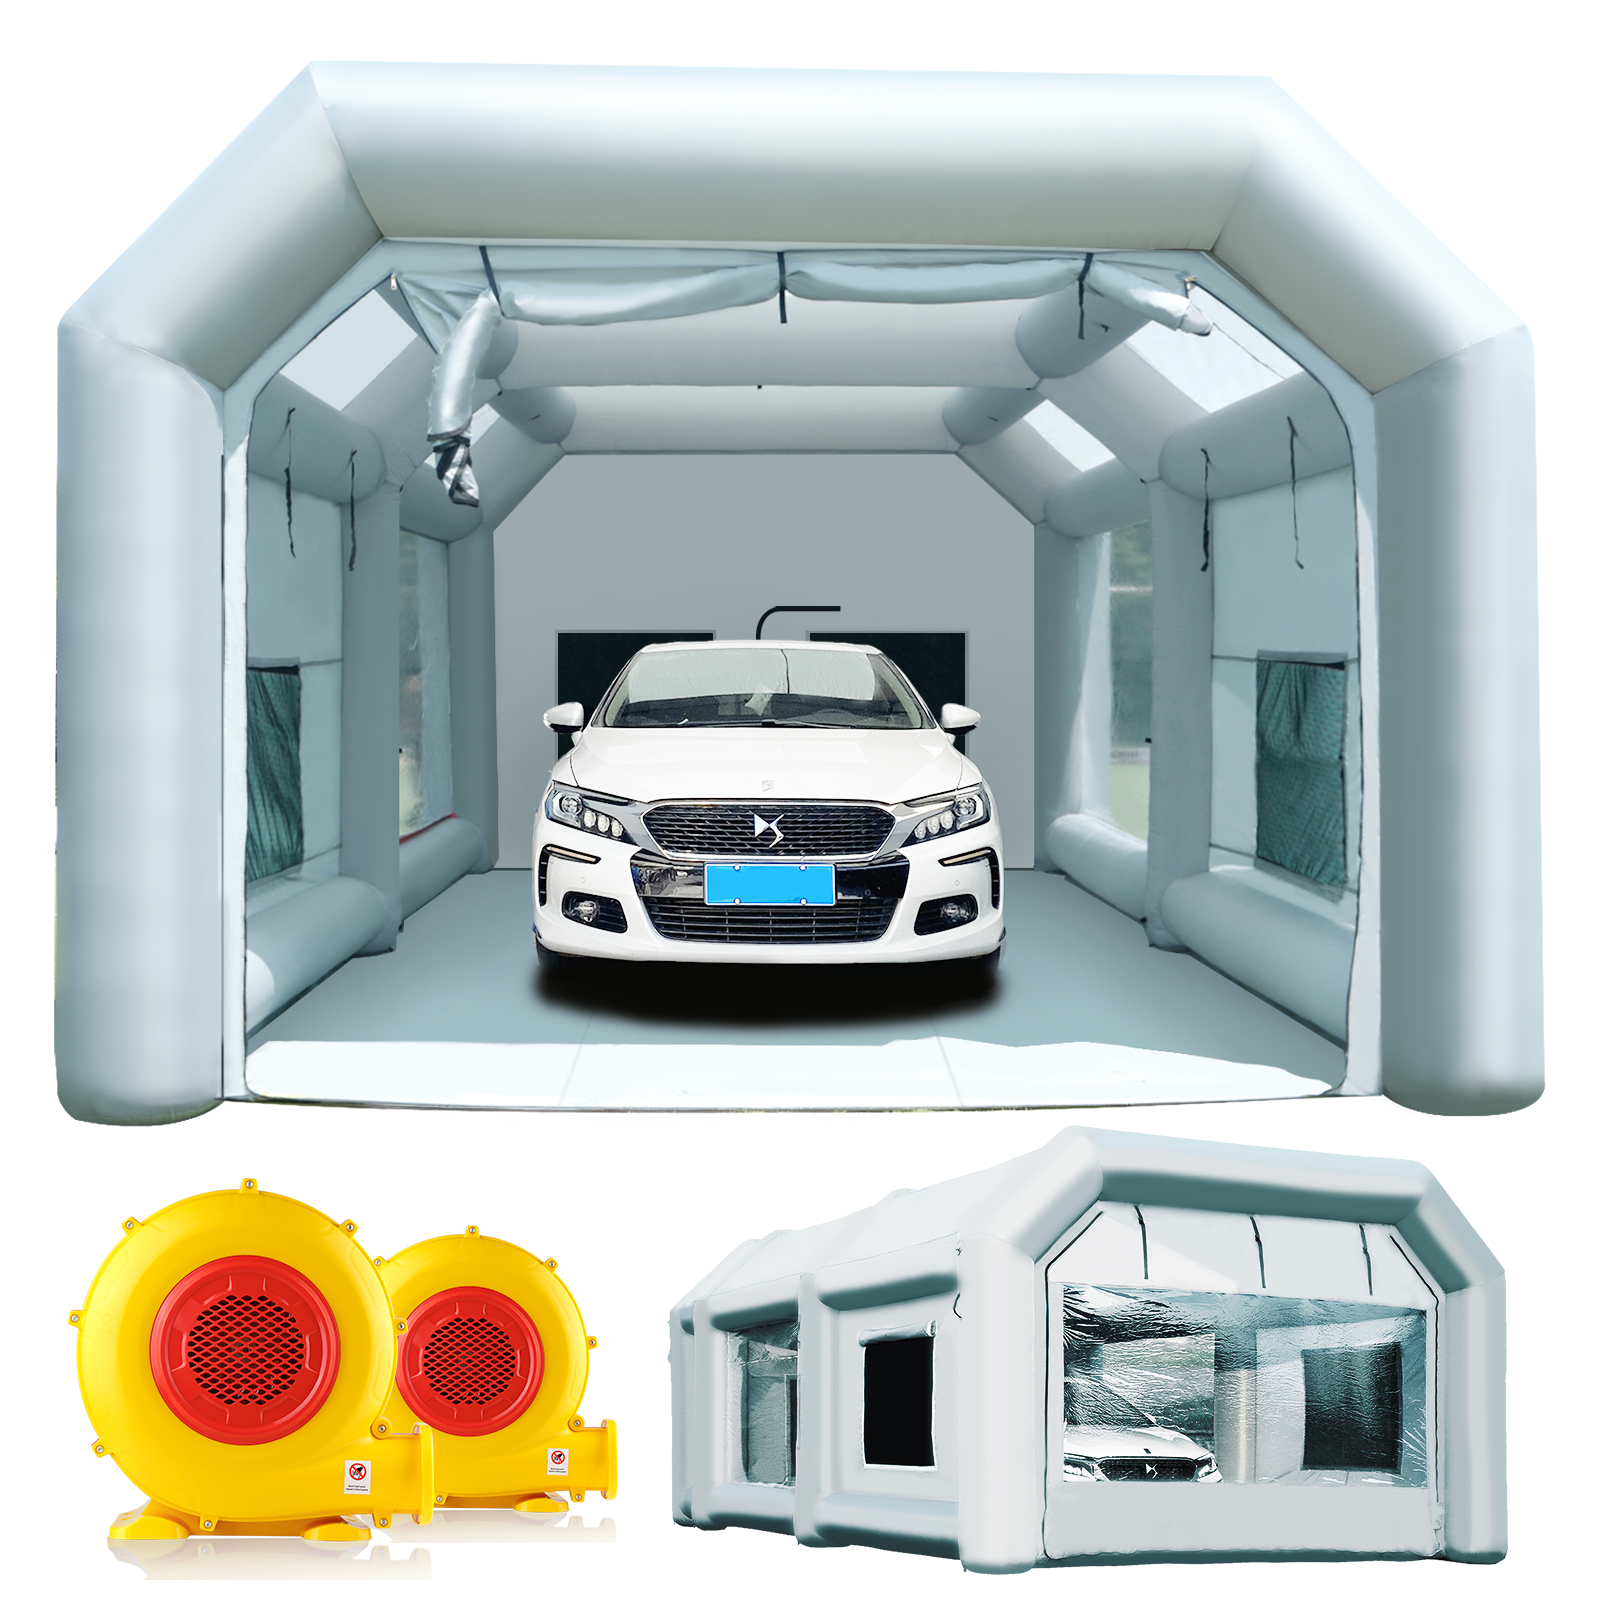 Sewinfla Professional Inflatable Paint Booth 28x15x11Ft with 2 Blowers (950W+950W) & Air Filter System Portable Paint Booth Tent Garage Inflatable Spray Booth Painting for Cars